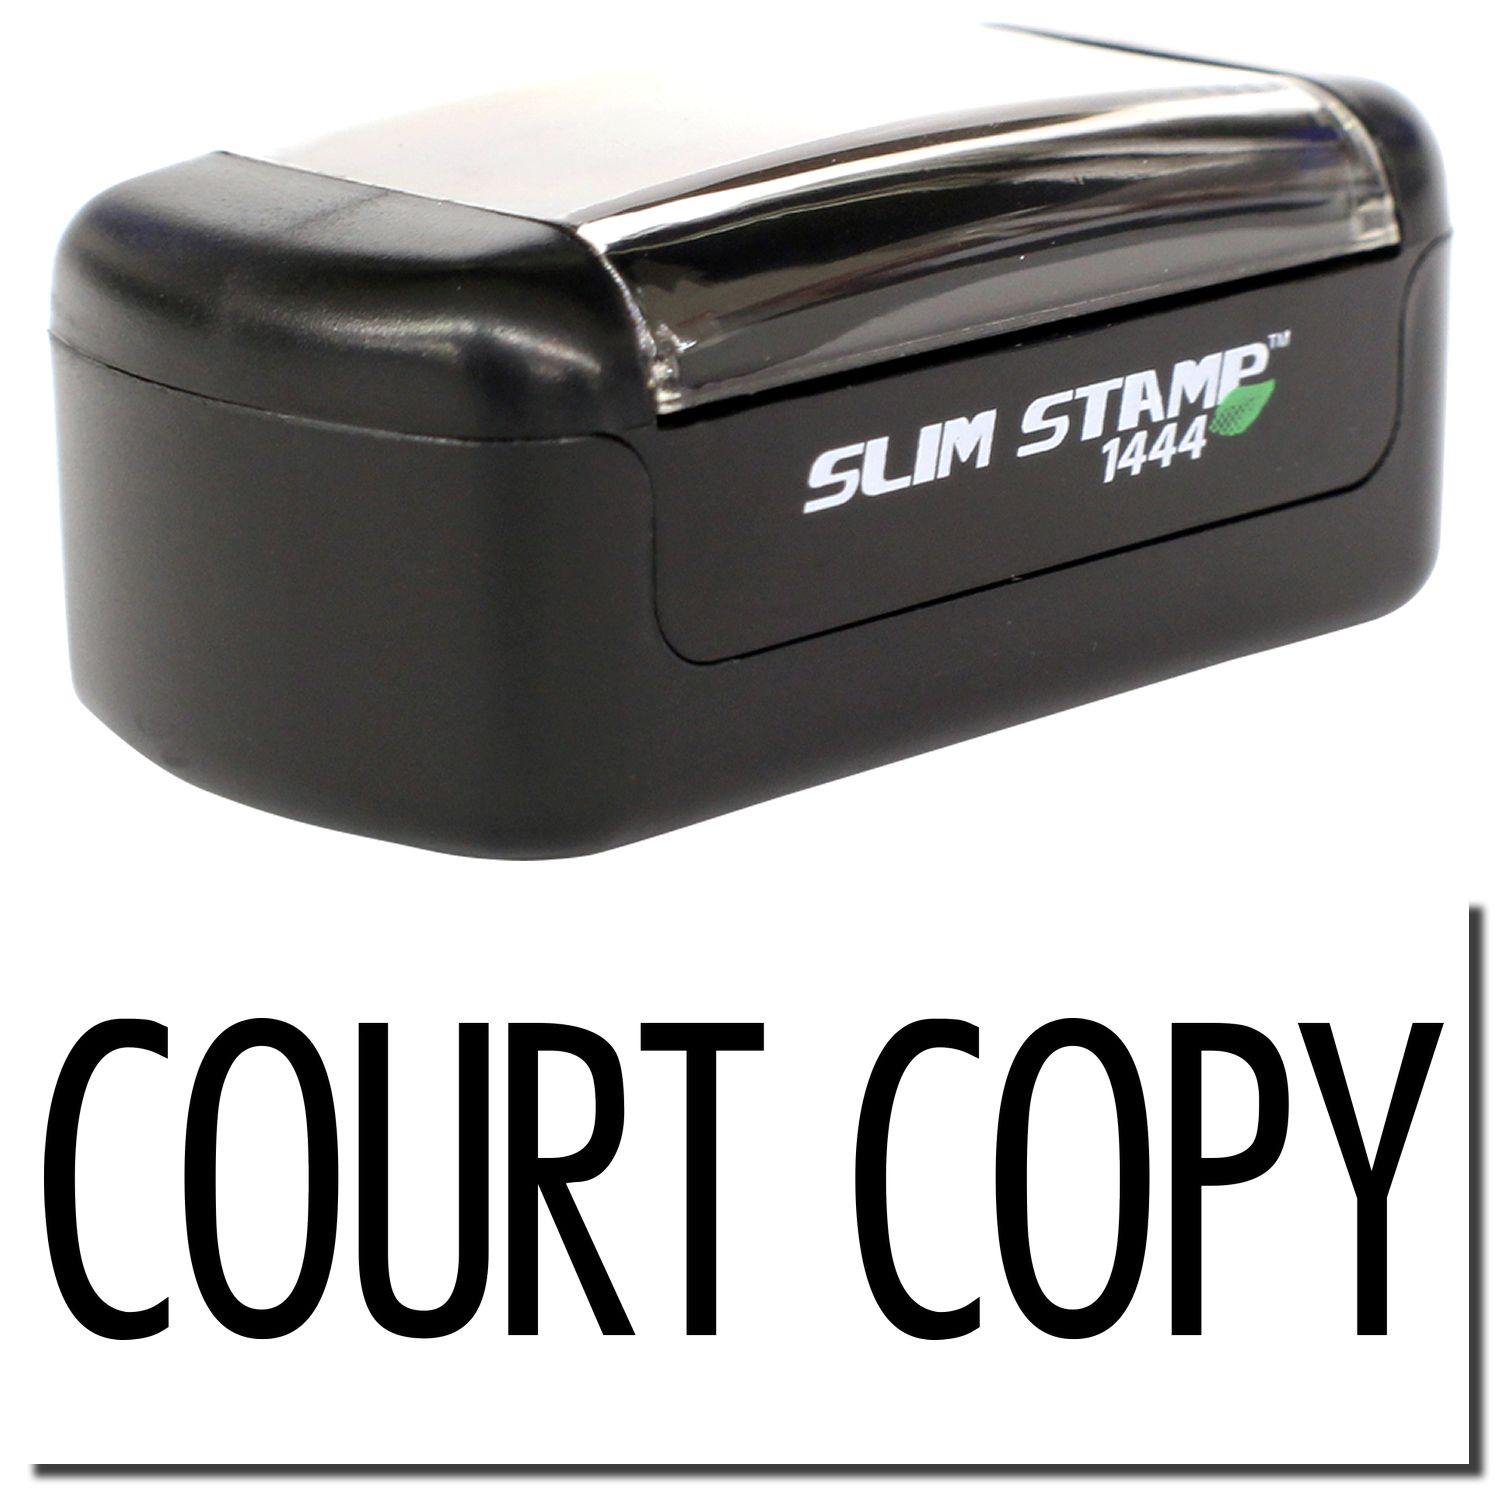 A stock office pre-inked stamp with a stamped image showing how the text "COURT COPY" in a narrow font is displayed after stamping.